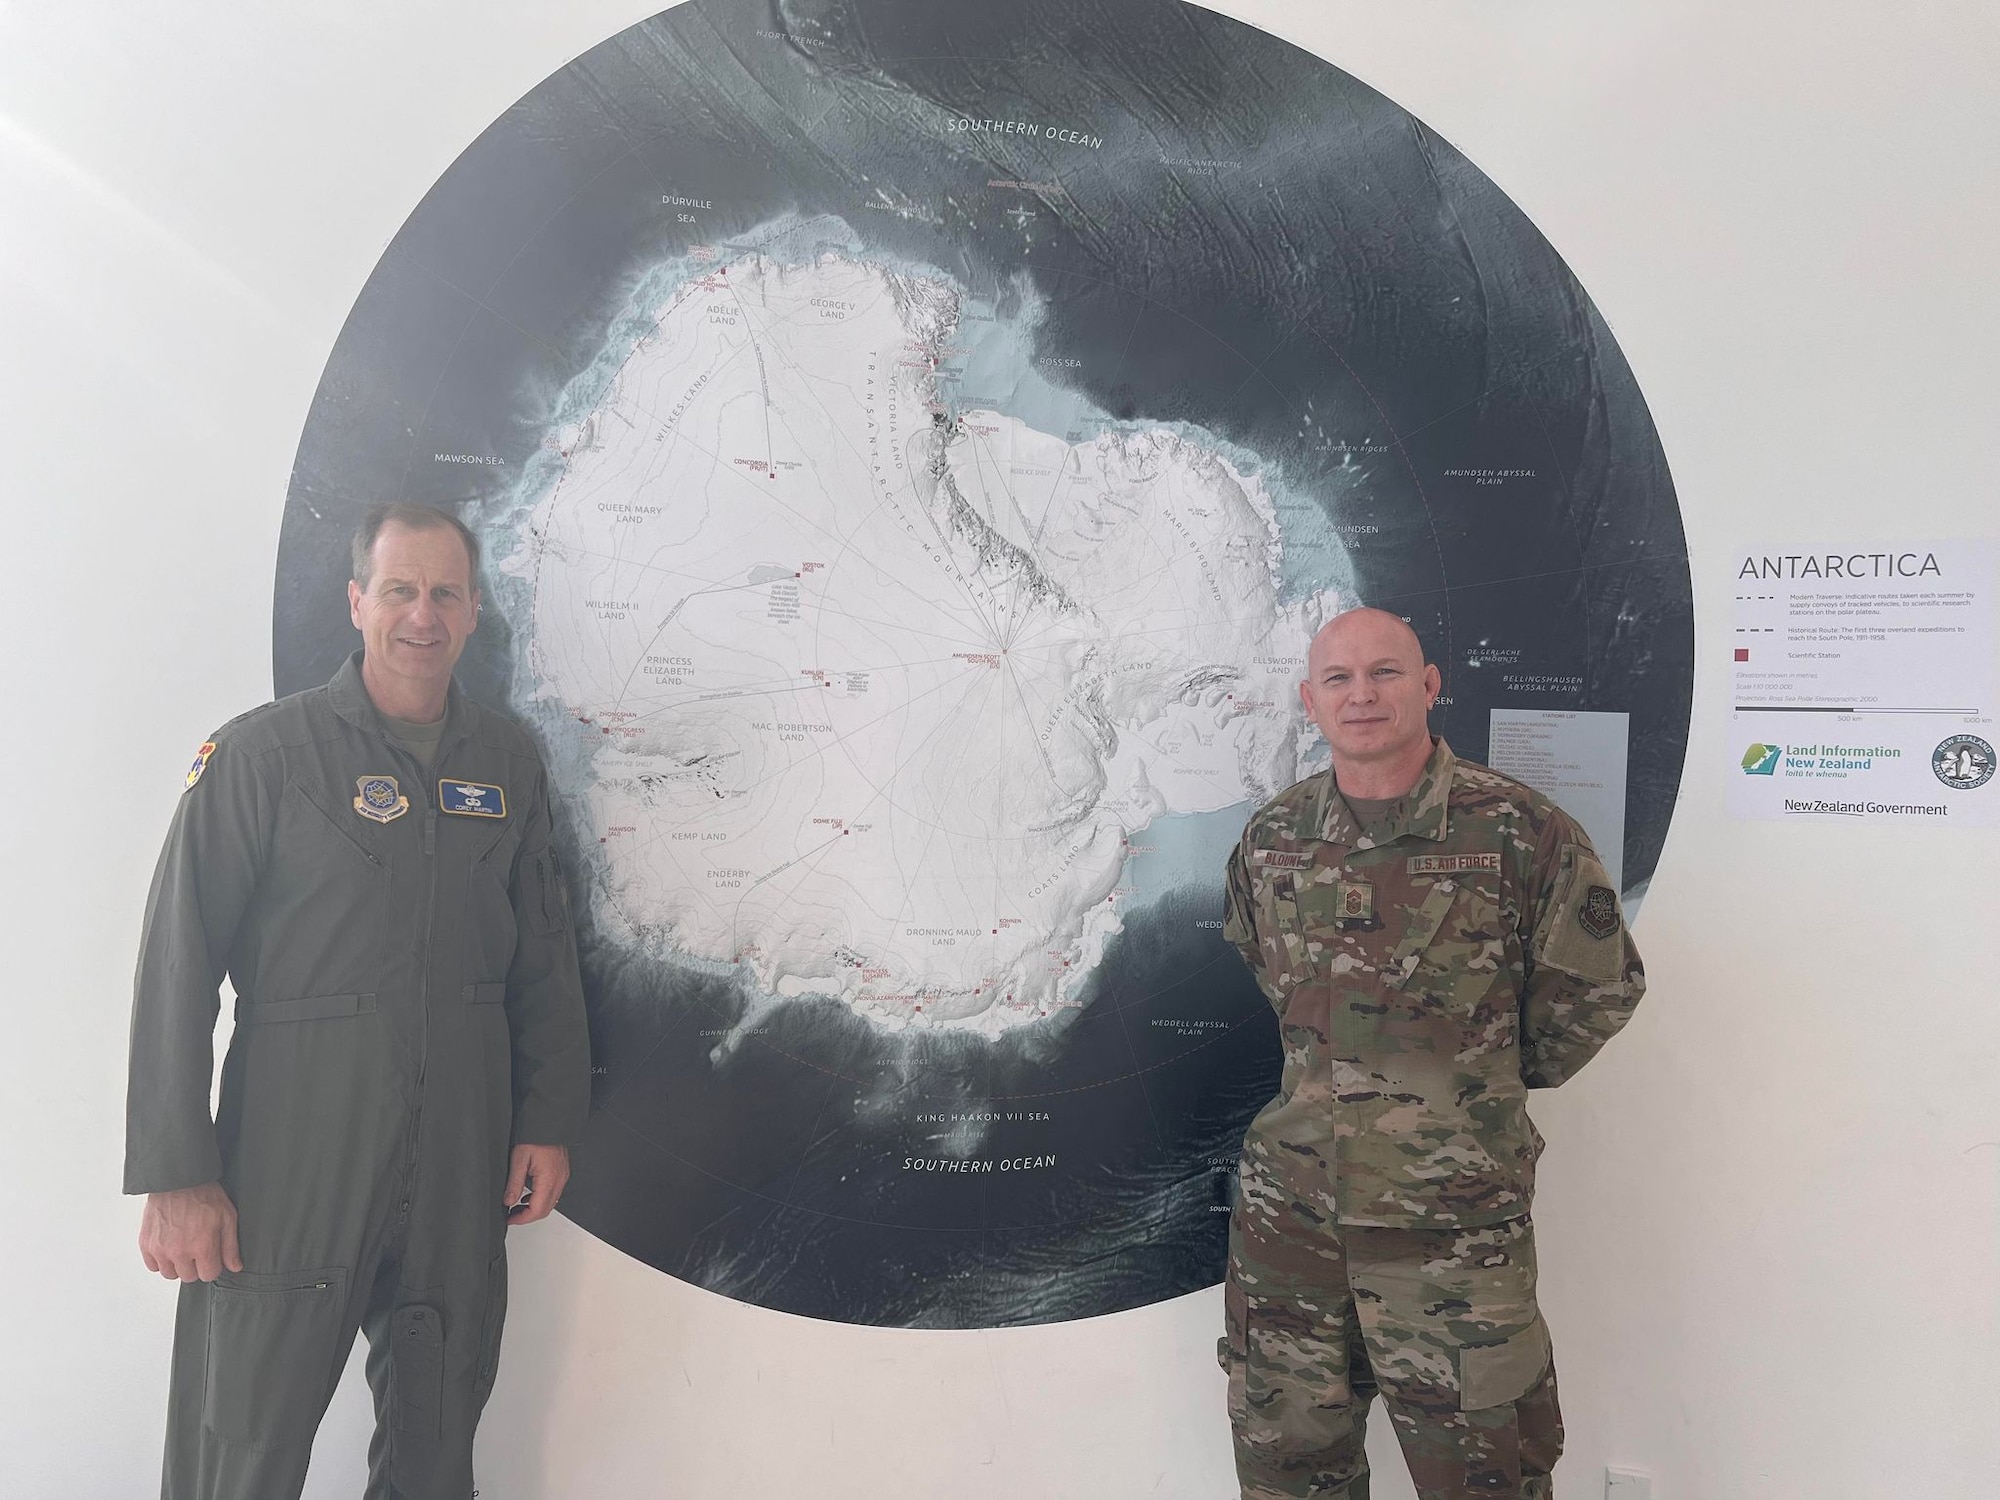 Maj. Gen. Corey Martin, 18th Air Force commander, and Chief Master Sgt. Thomas Blount, 18th Air Force command chief, participated in the 68th anniversary of Operation Deep Freeze (ODF). ODF is crucial in building relationships with partner nations like New Zealand as well as providing Department of Defense logistical support to the National Science Foundation (NSF) for their continued research with the U.S. Antarctic Program.